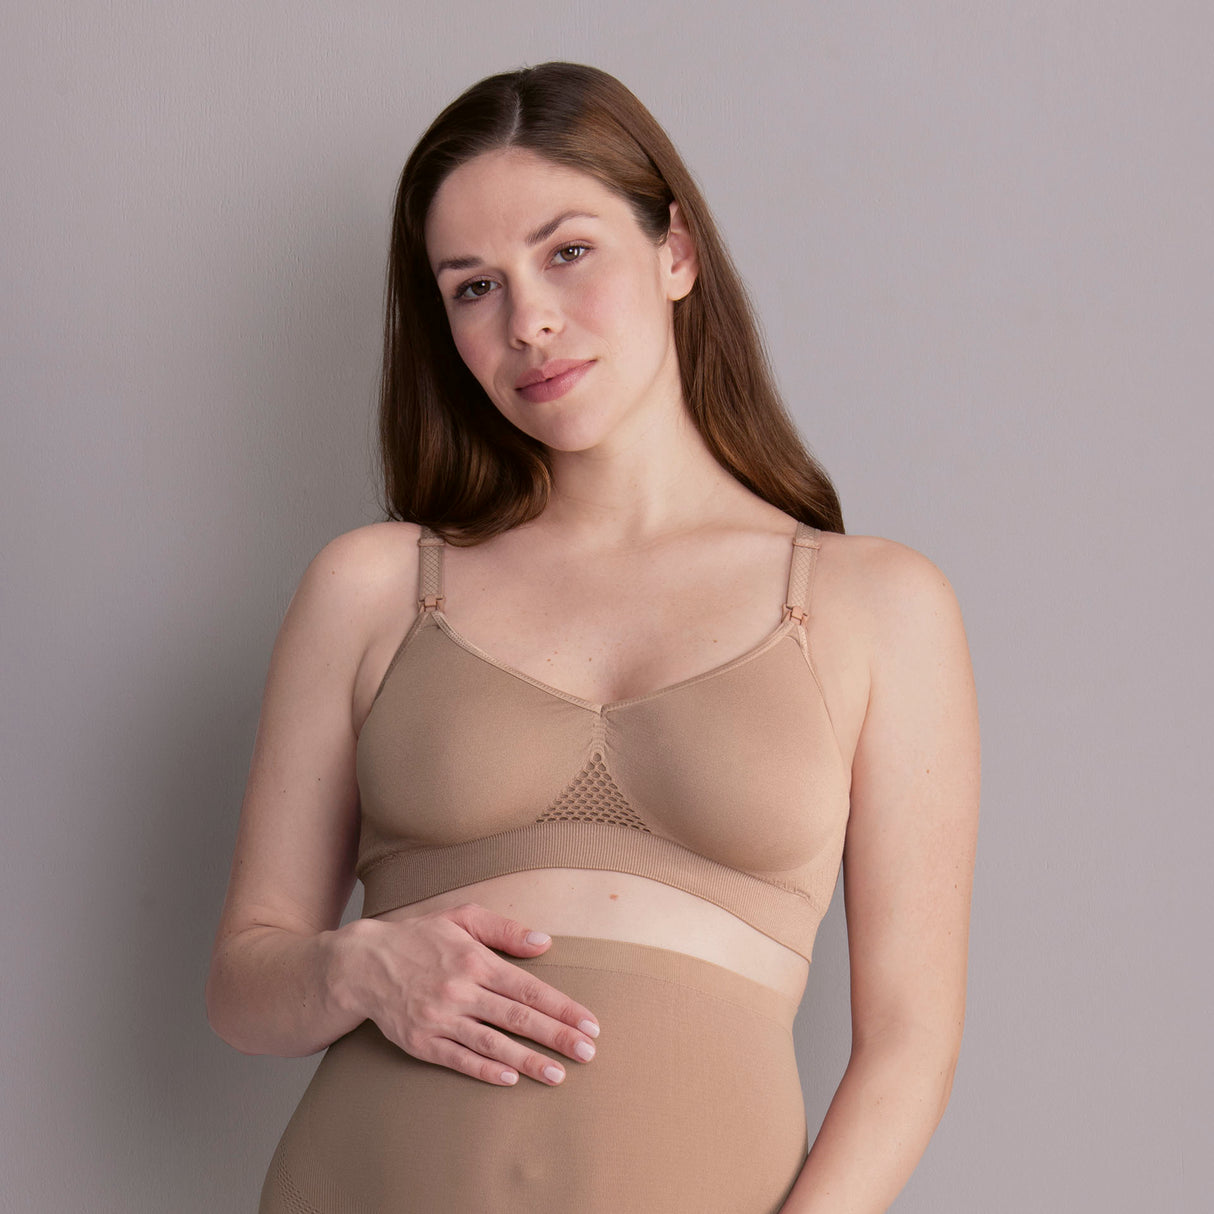 SEAMLESS | nursing bra | without wires | dusty rose